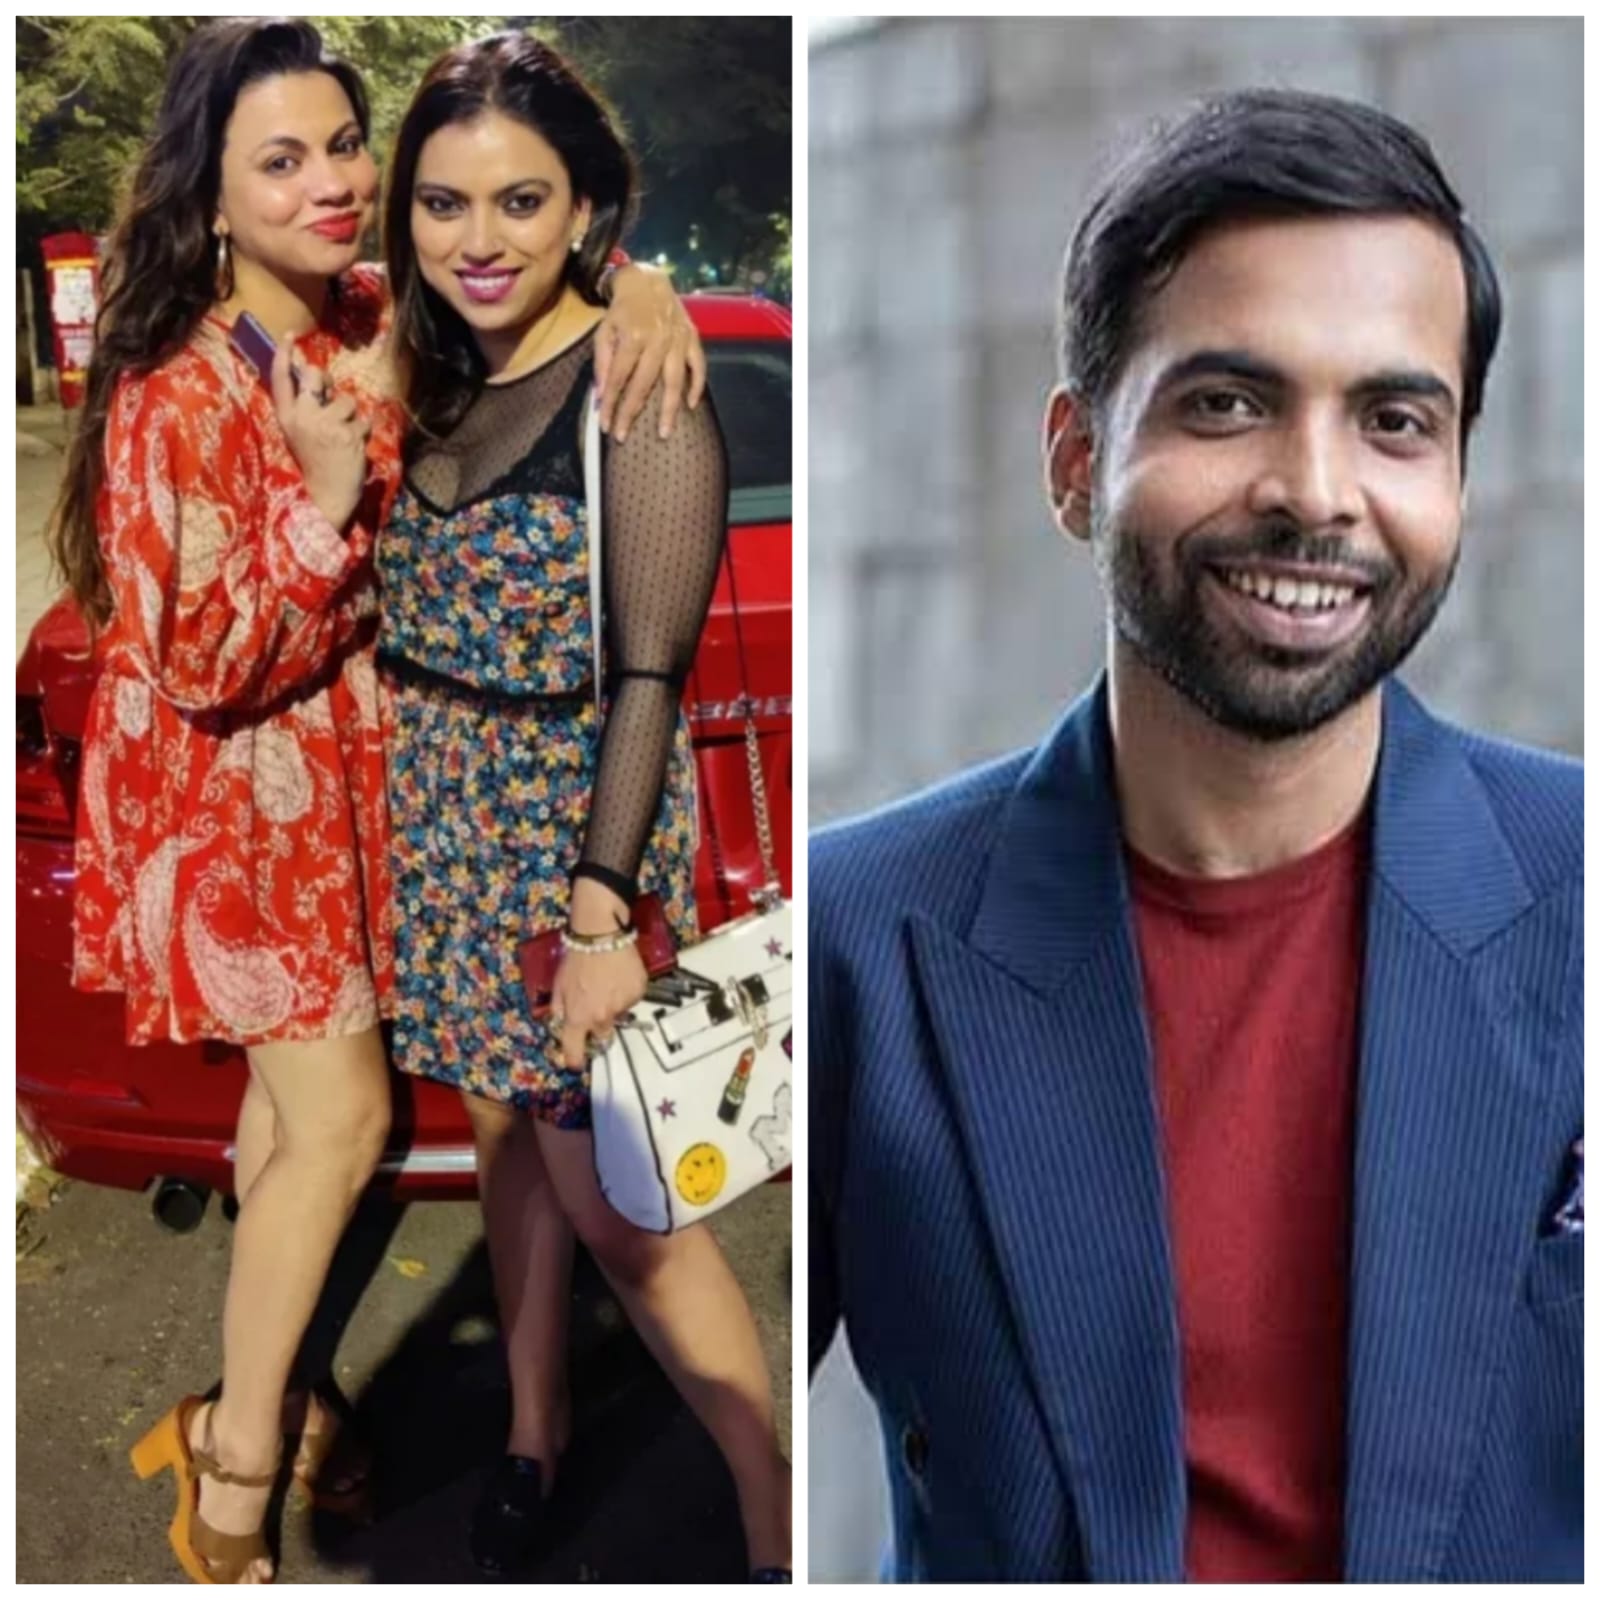 A new Hotstar project from producers Preeti Simoes and Neeti Simoes will feature Abhishek Banerjee as the main antagonist, instead of Sunil Grover